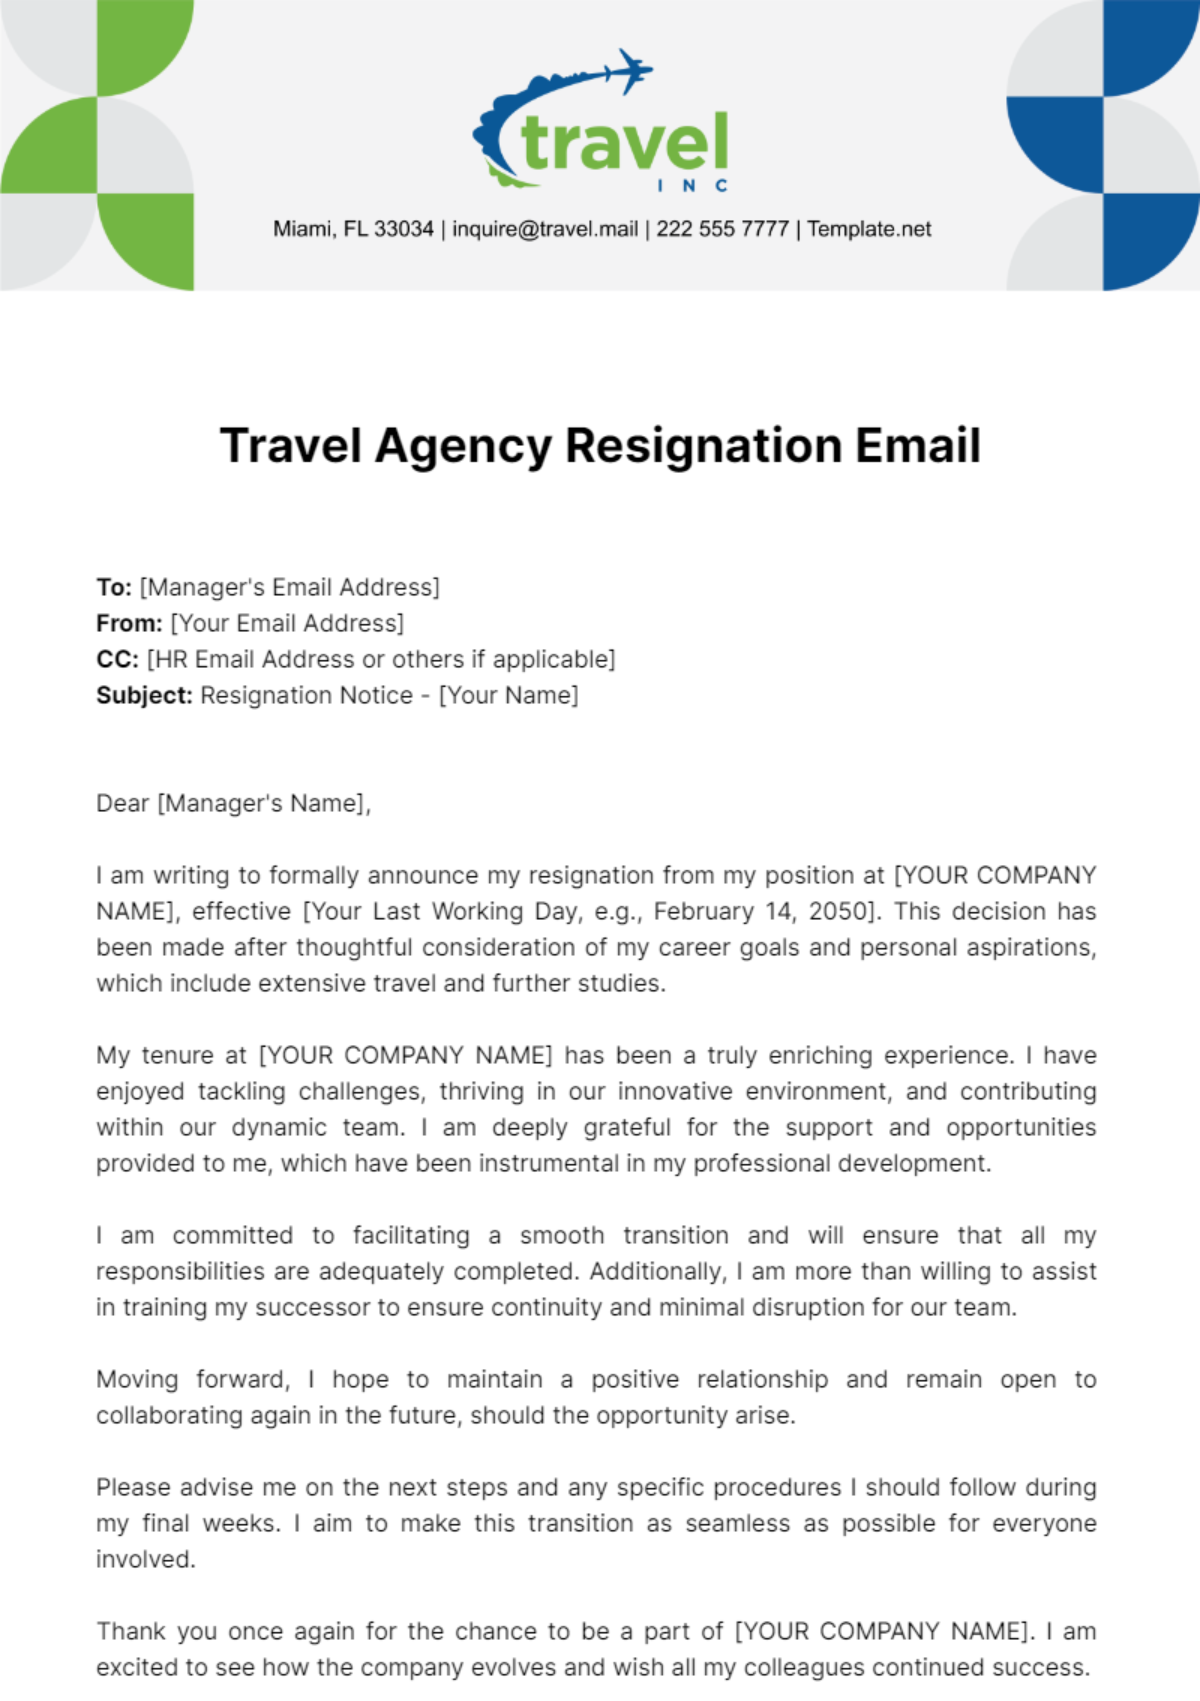 Travel Agency Resignation Email Template